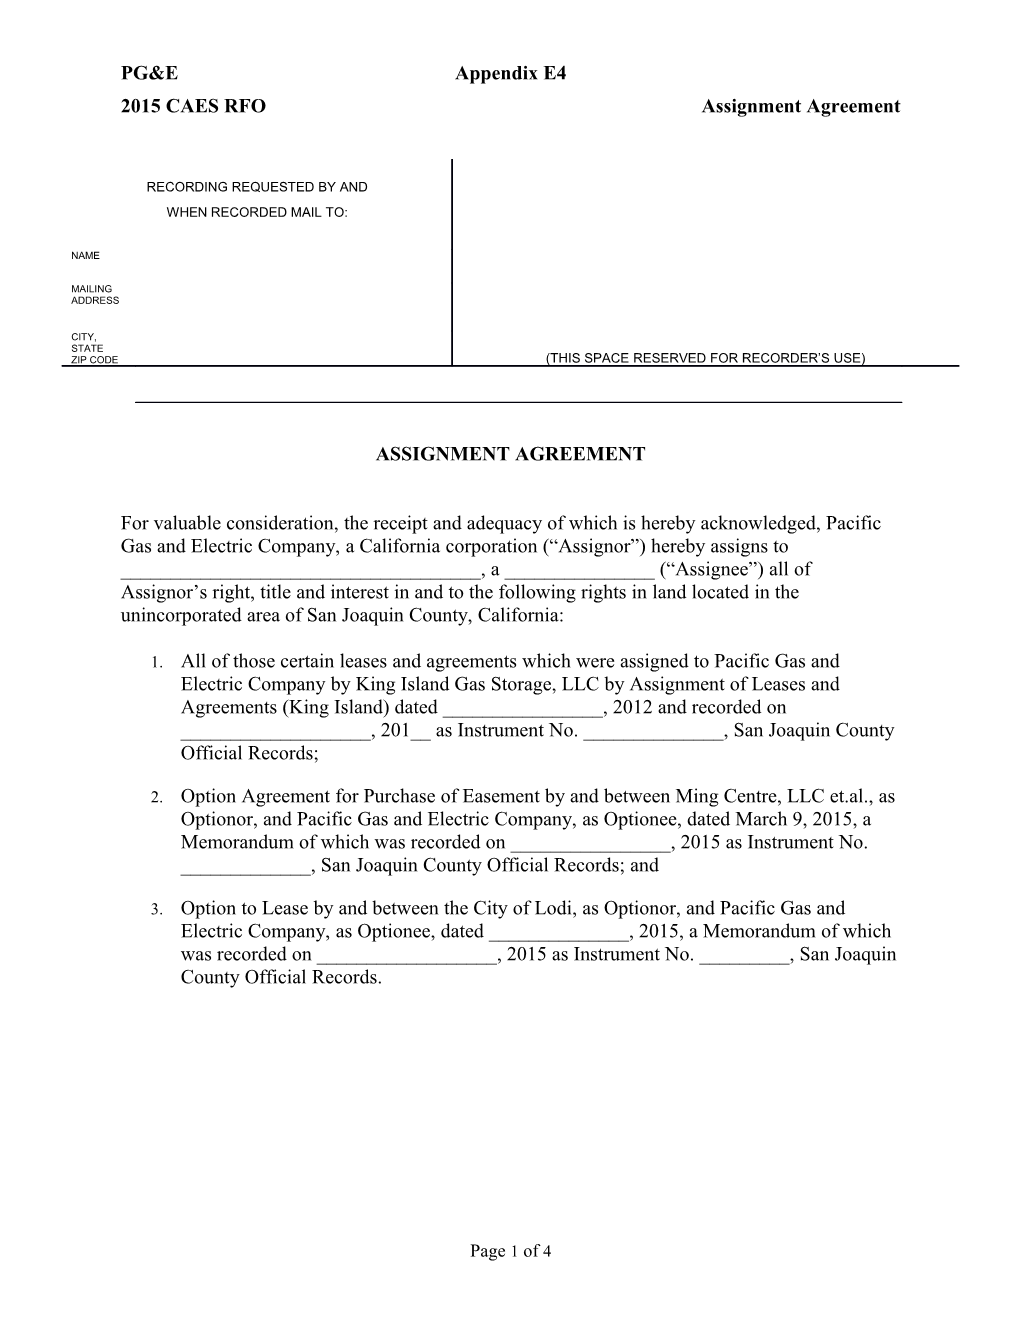 2015 CAES Rfoassignment Agreement